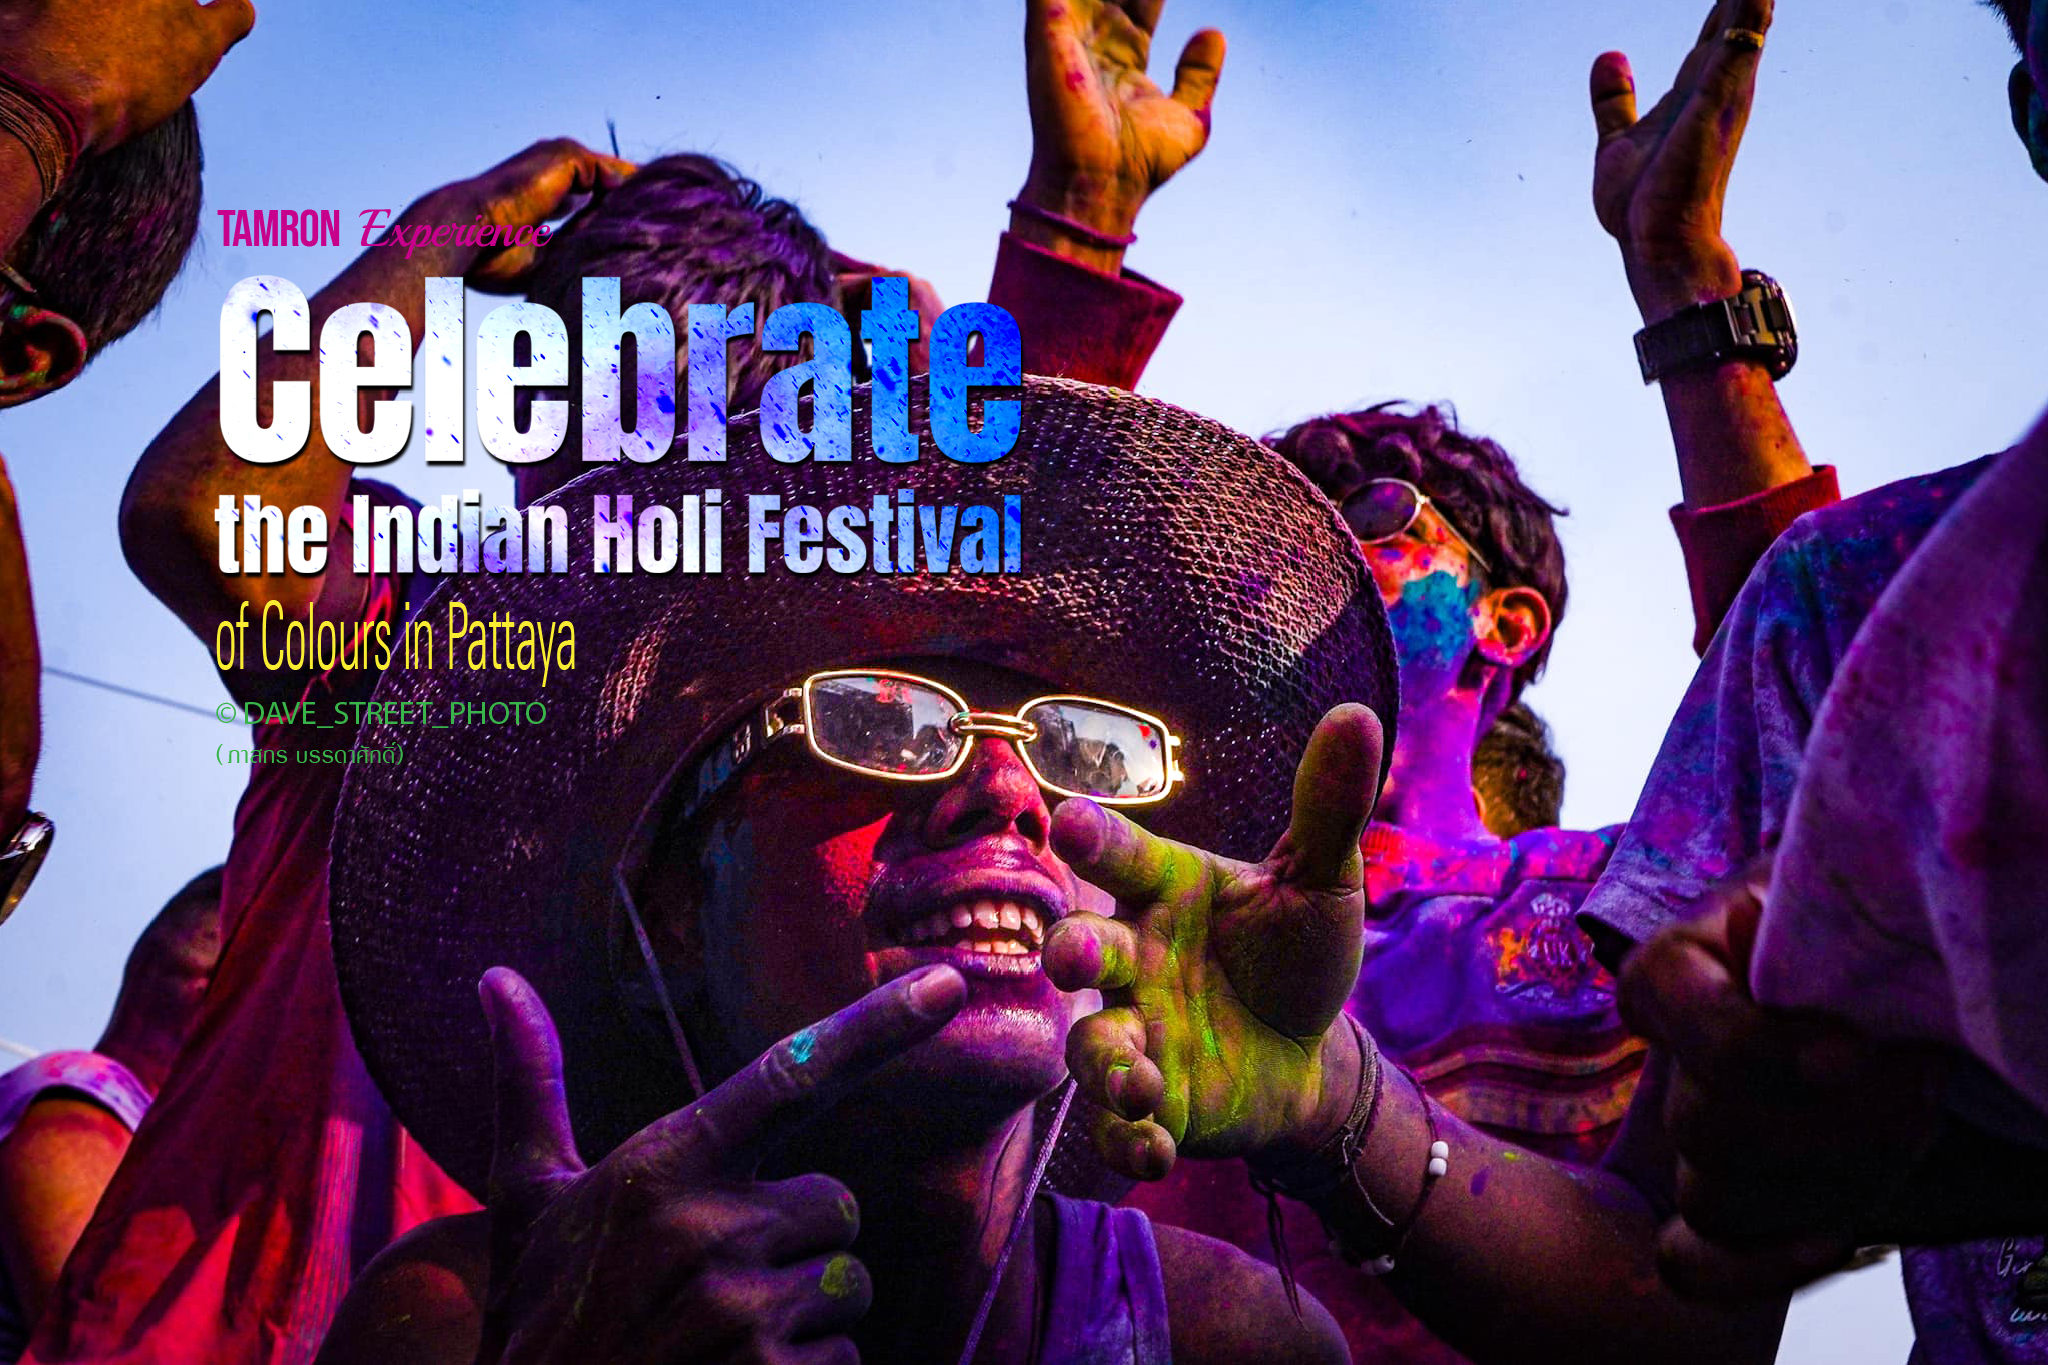 TAMRON EXPERIENCE : Celebrate the Indian Holi Festival of Colours in Pattaya